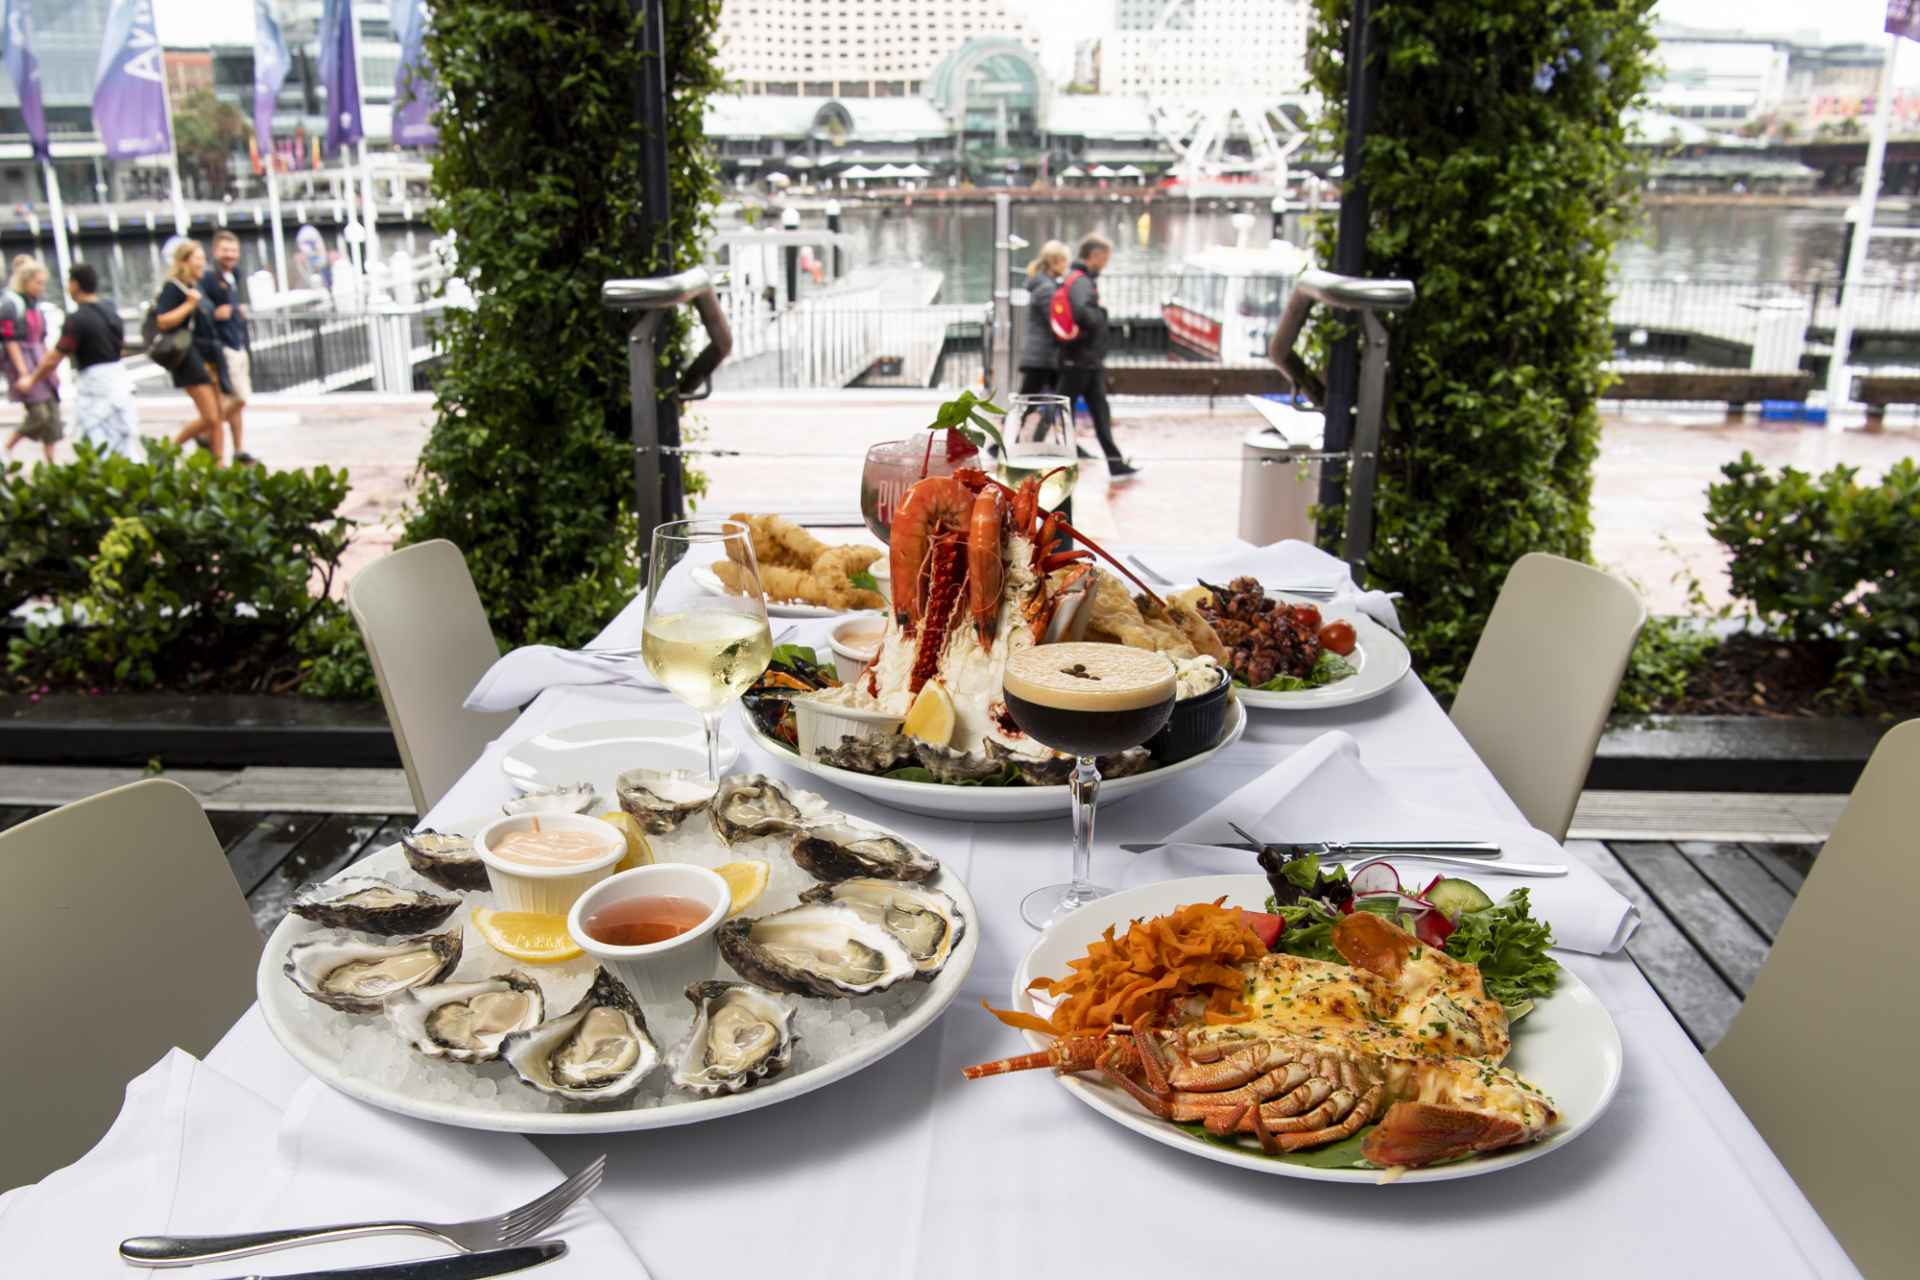 Nick's Seafood Restaurant - Waterfront seafood dining | Darling Harbour